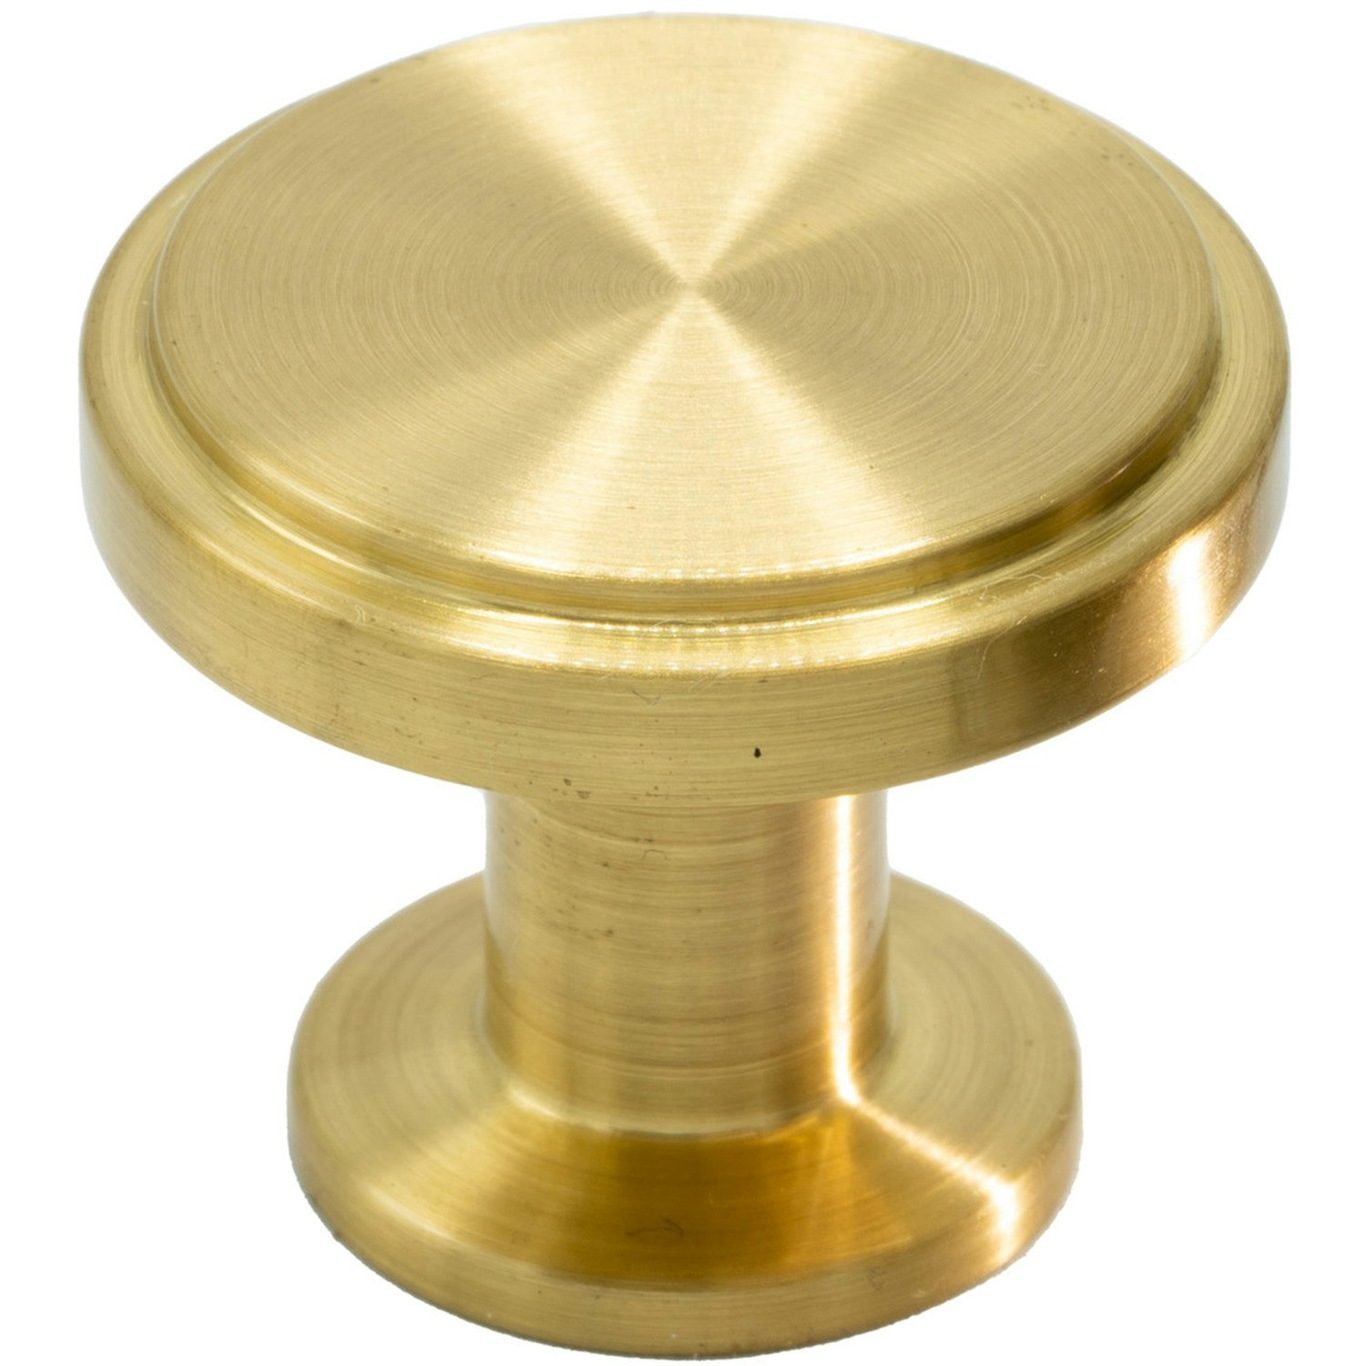 Uno Knob 30 mm, Brushed Uncoated Brass